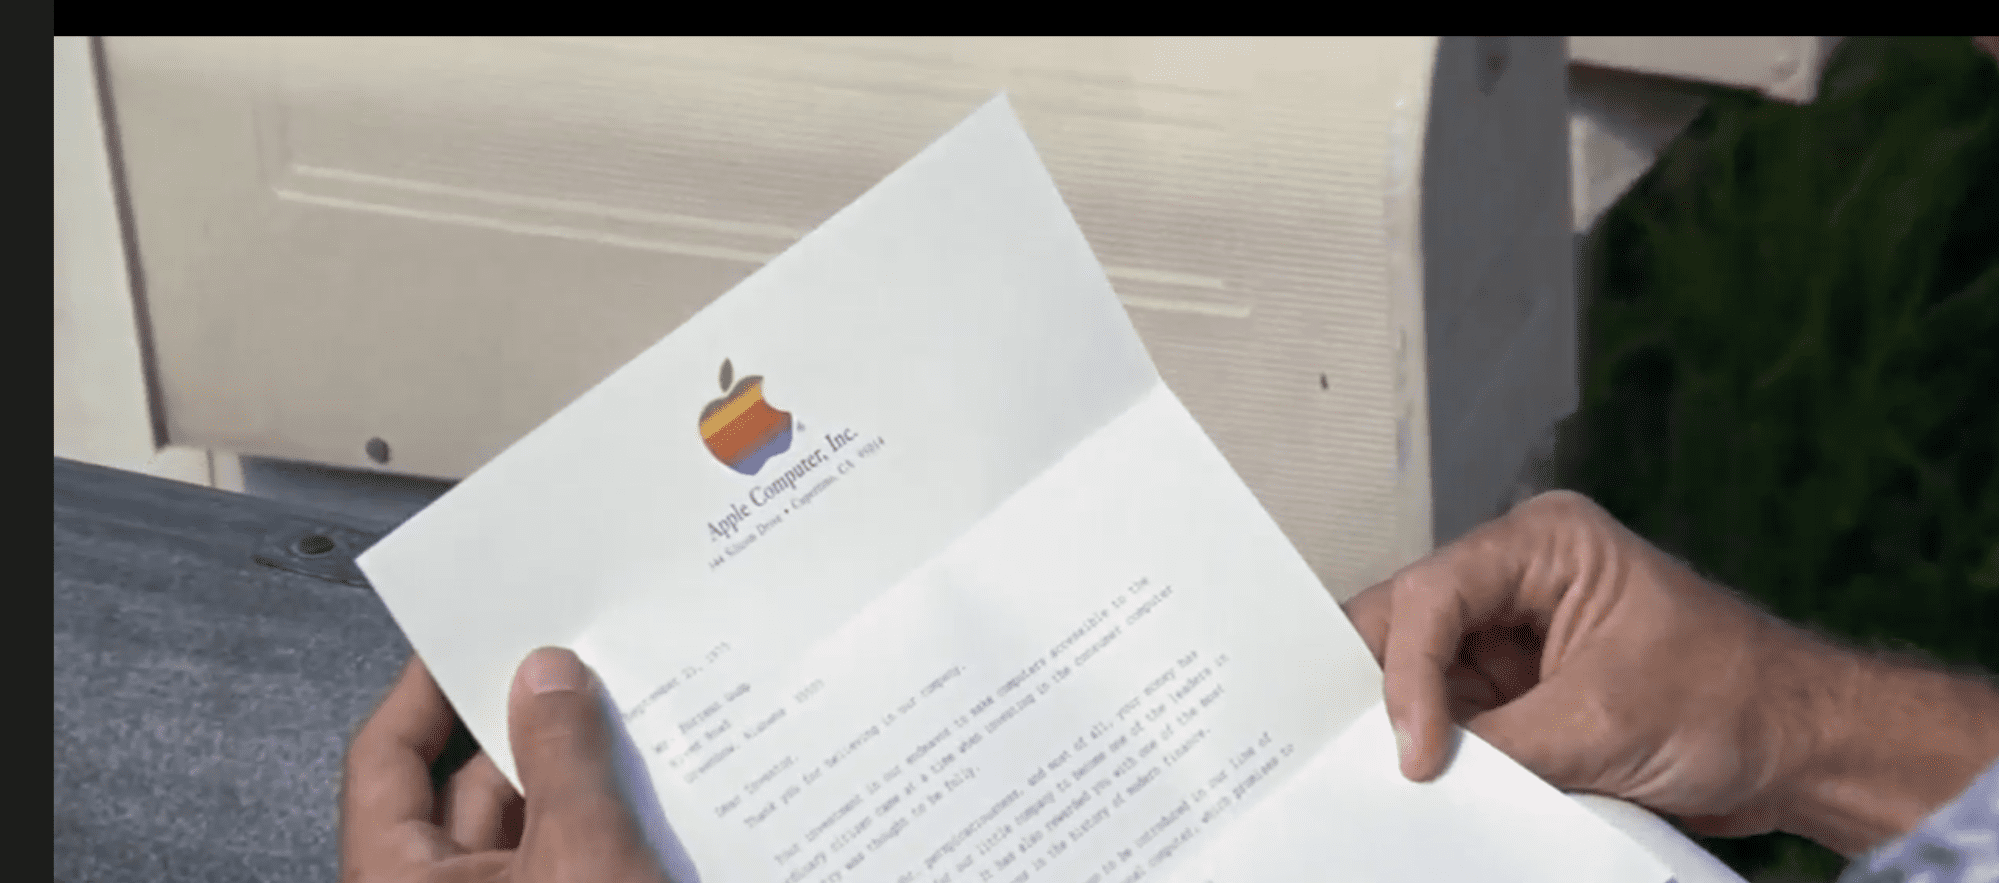 Letter from Apple as product placement